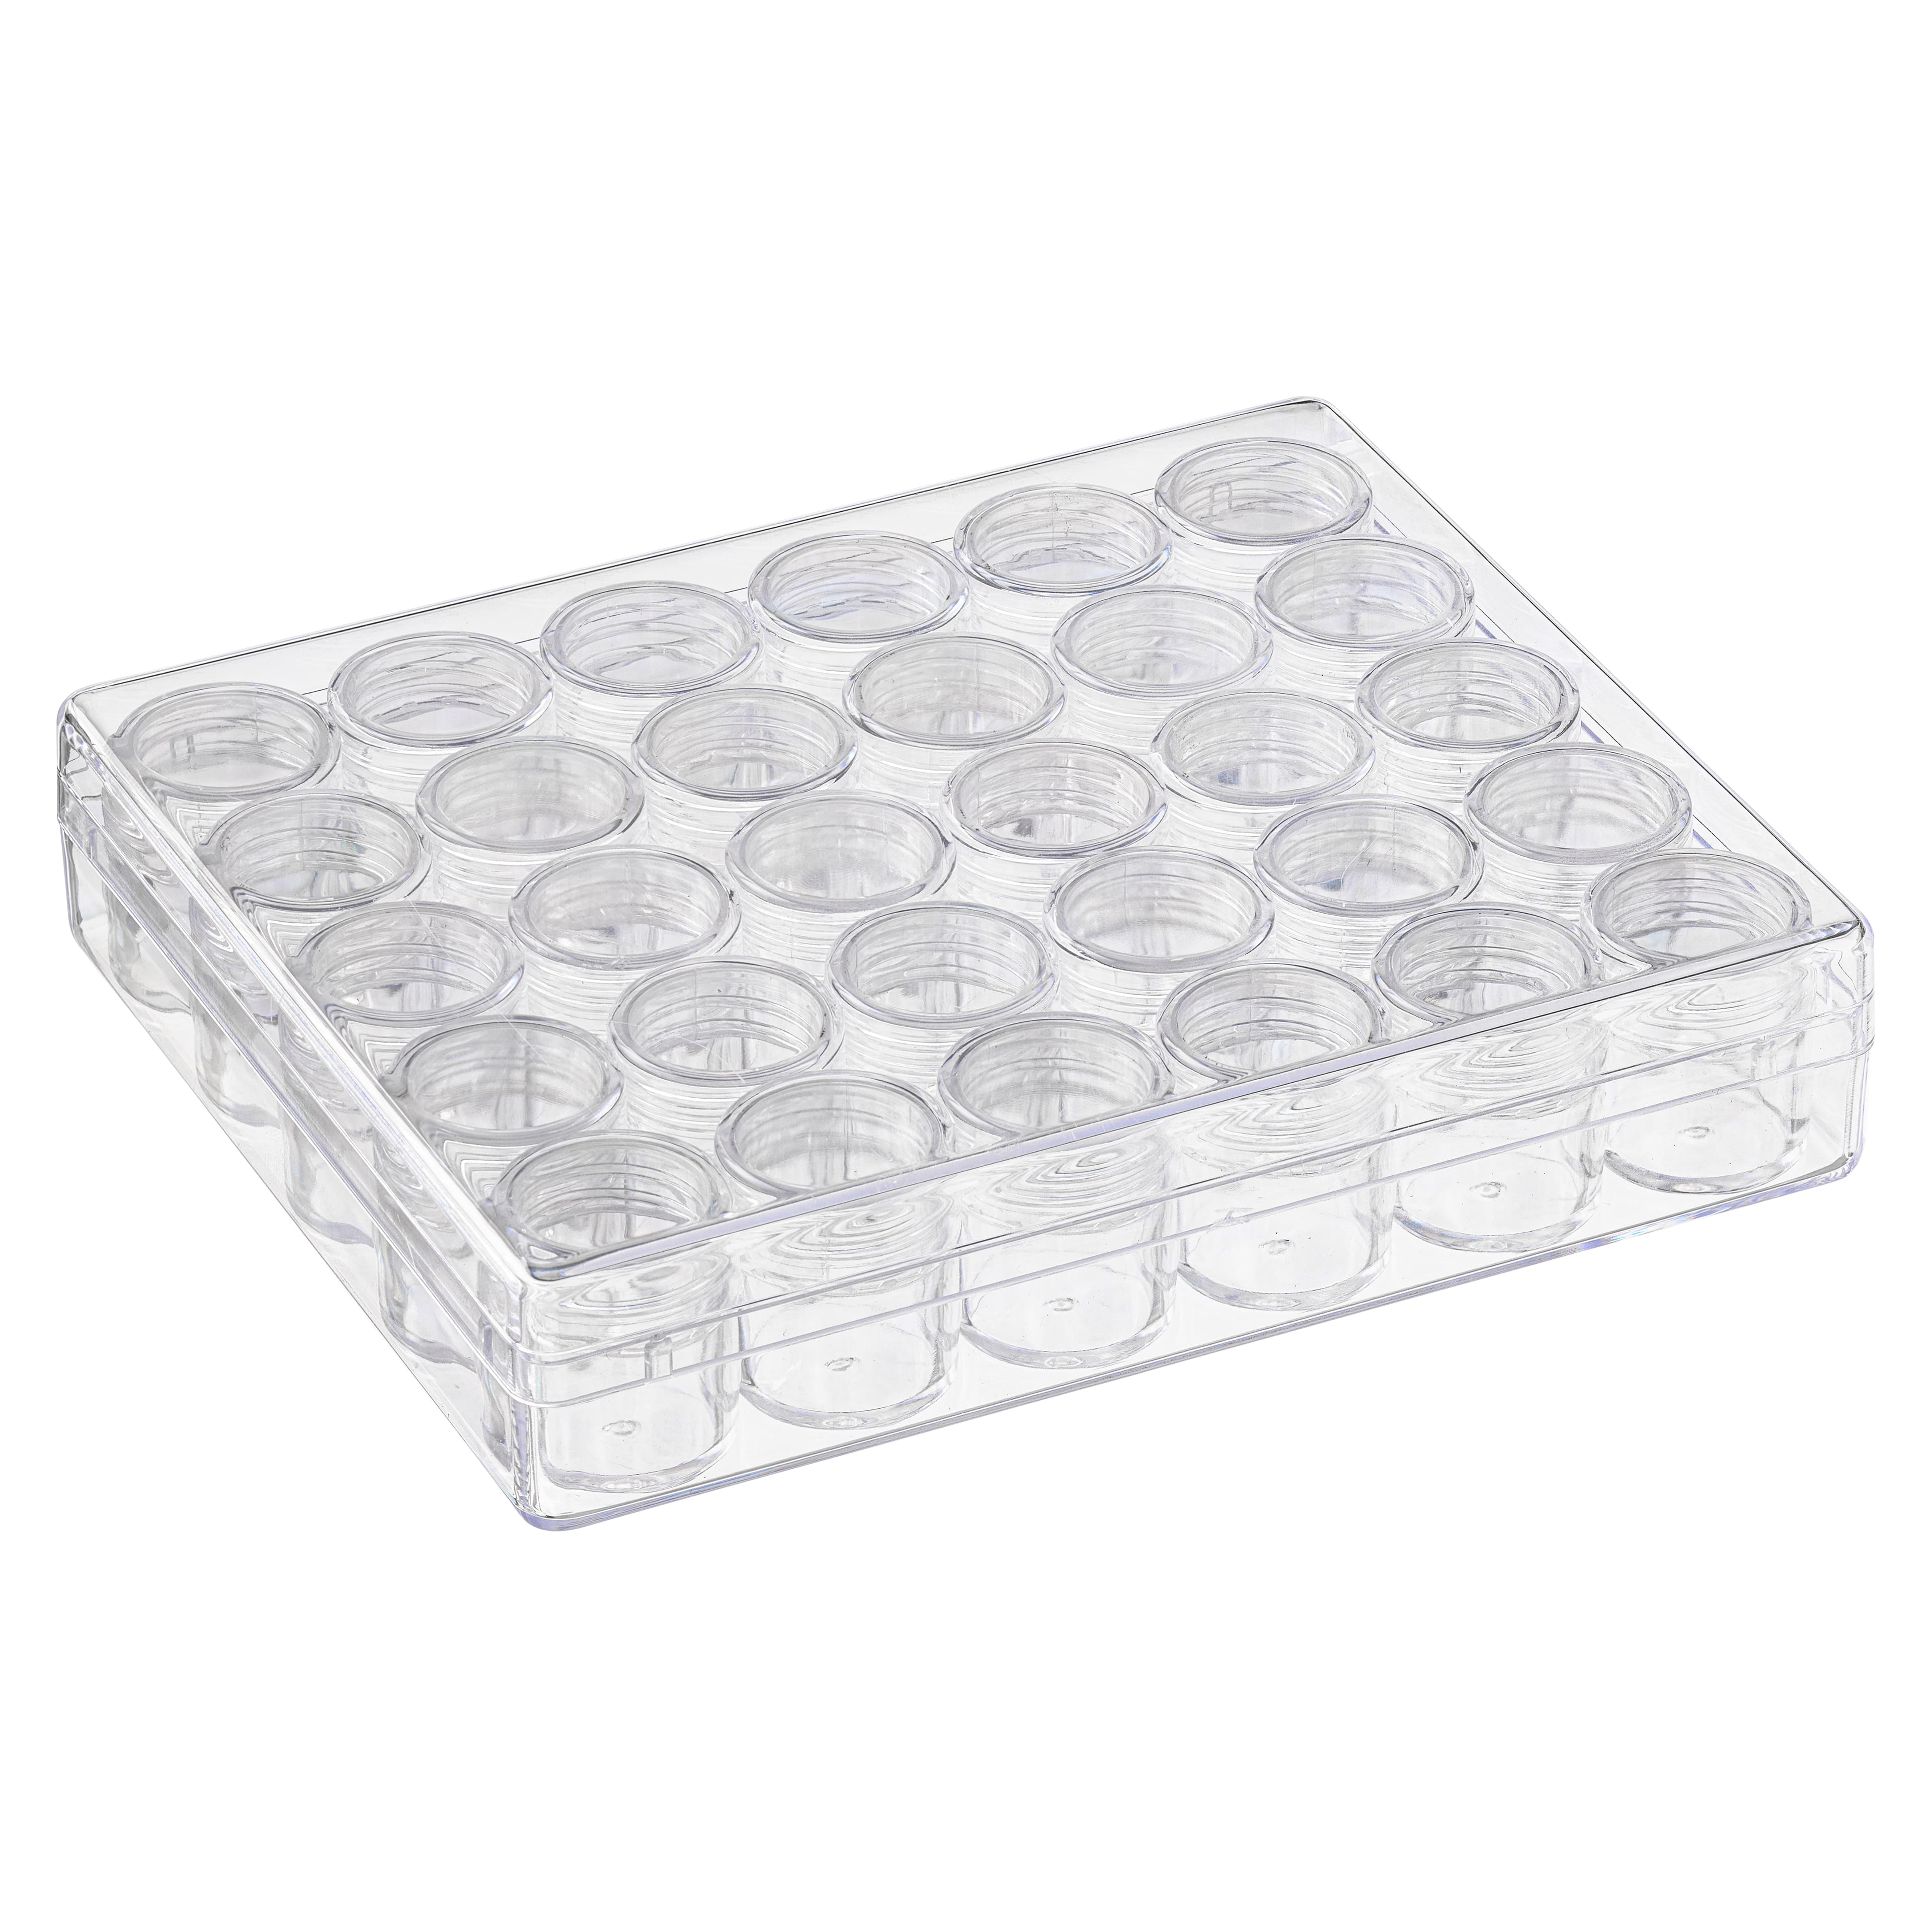 6 Pack: Bead Organizer with Storage Containers by Simply Tidy in Clear | 6.3 x 5.3 x 1.4